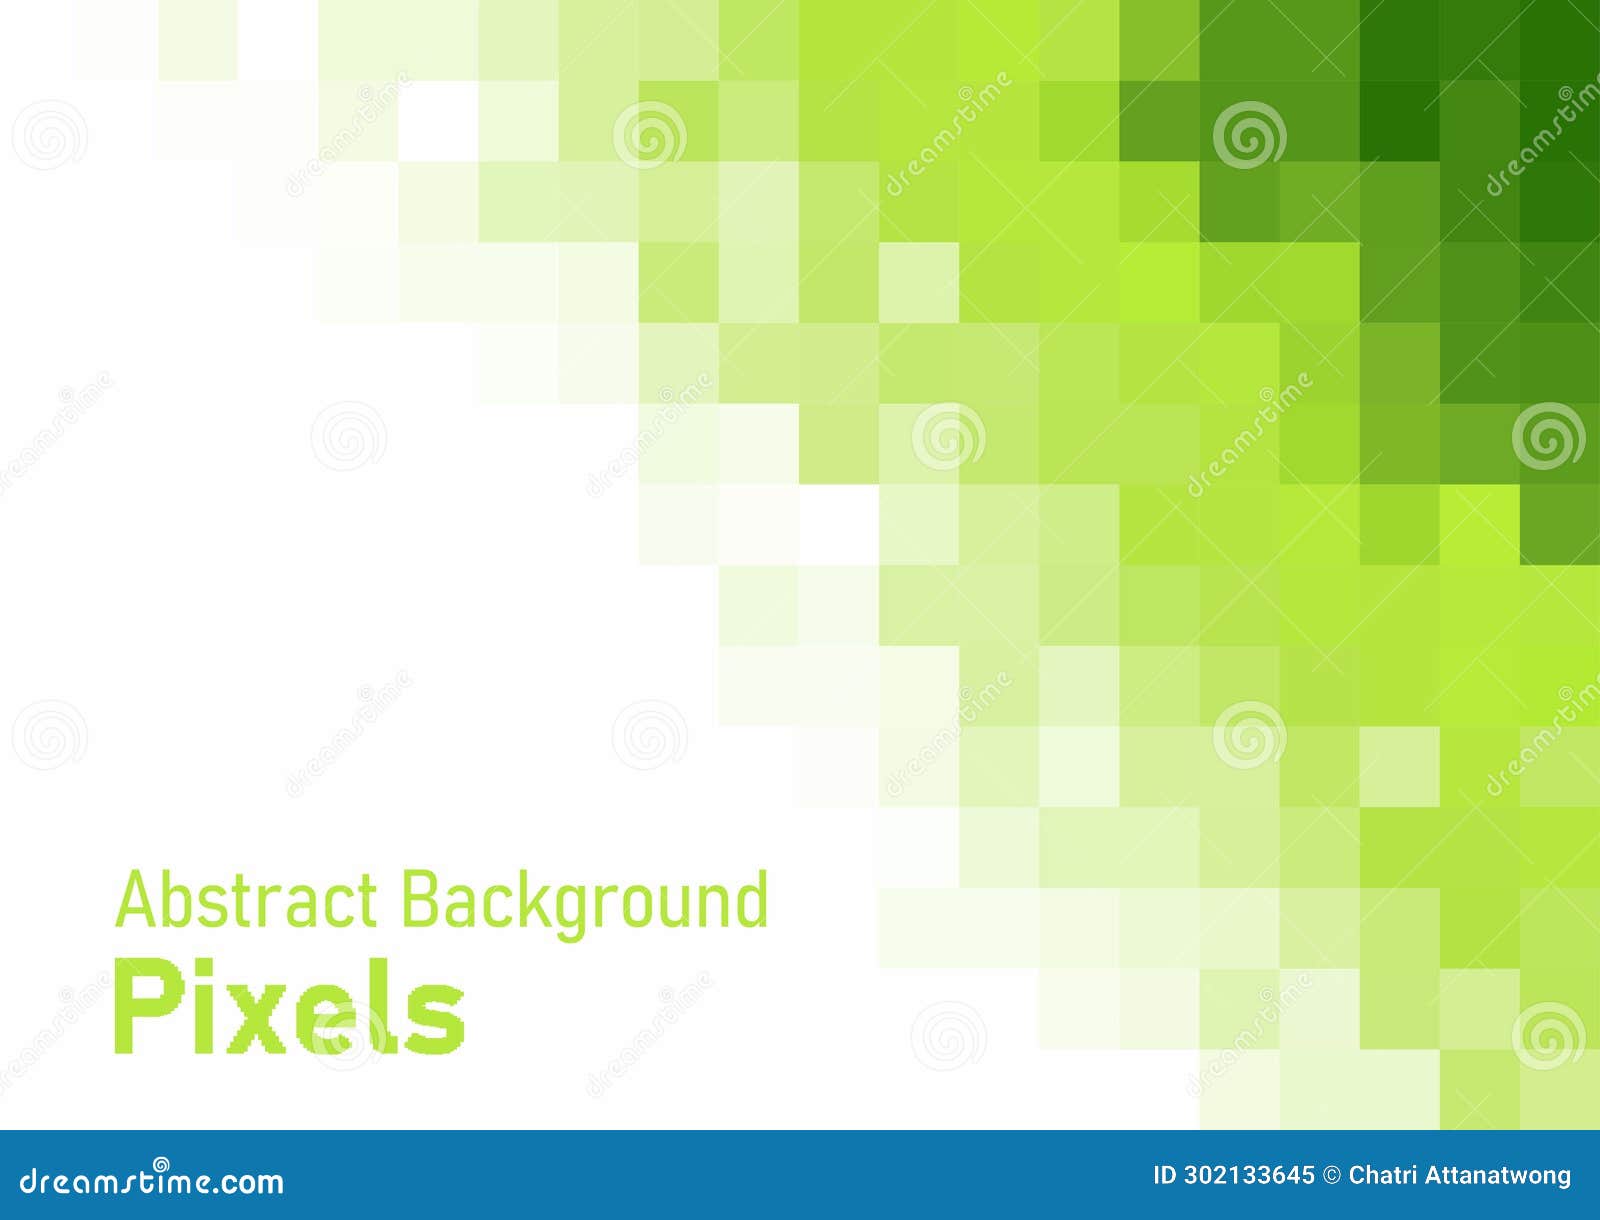 pixels disintegrate pattern. geometric mosaic background, green color gradient   template for wallpaper, poster